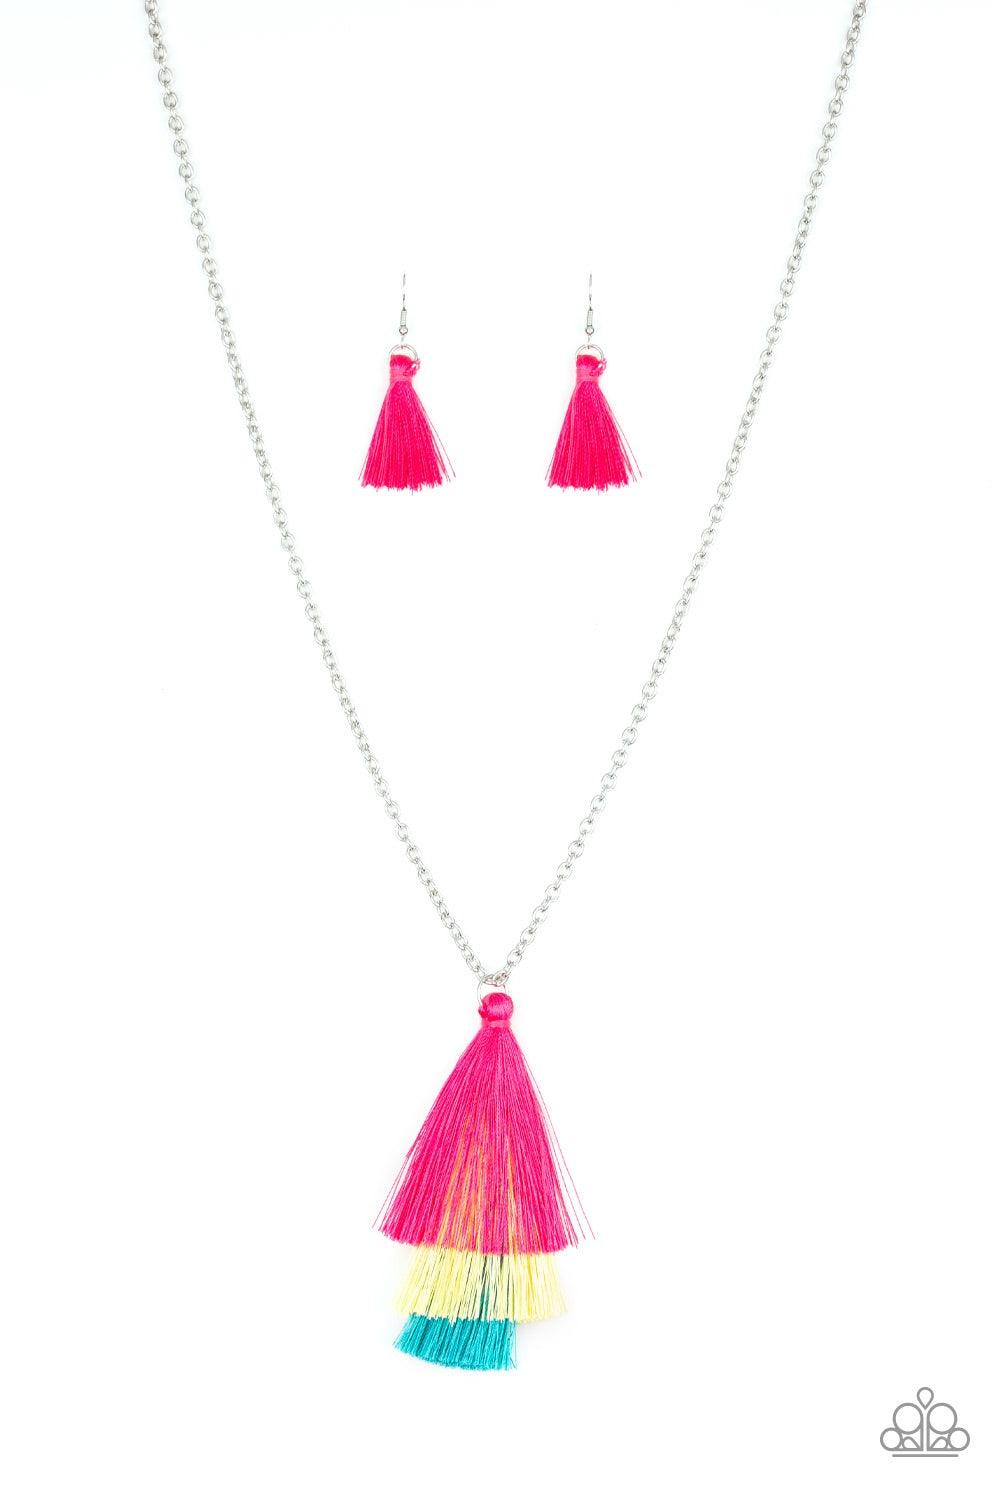 Paparazzi Accessories Triple The Tassel - Multi Featuring shimmery pink, yellow, and blue thread, a 3-tiered tassel swings from the bottom of a lengthened silver chain for a colorful, wanderlust vibe. Features an adjustable clasp closure. Jewelry